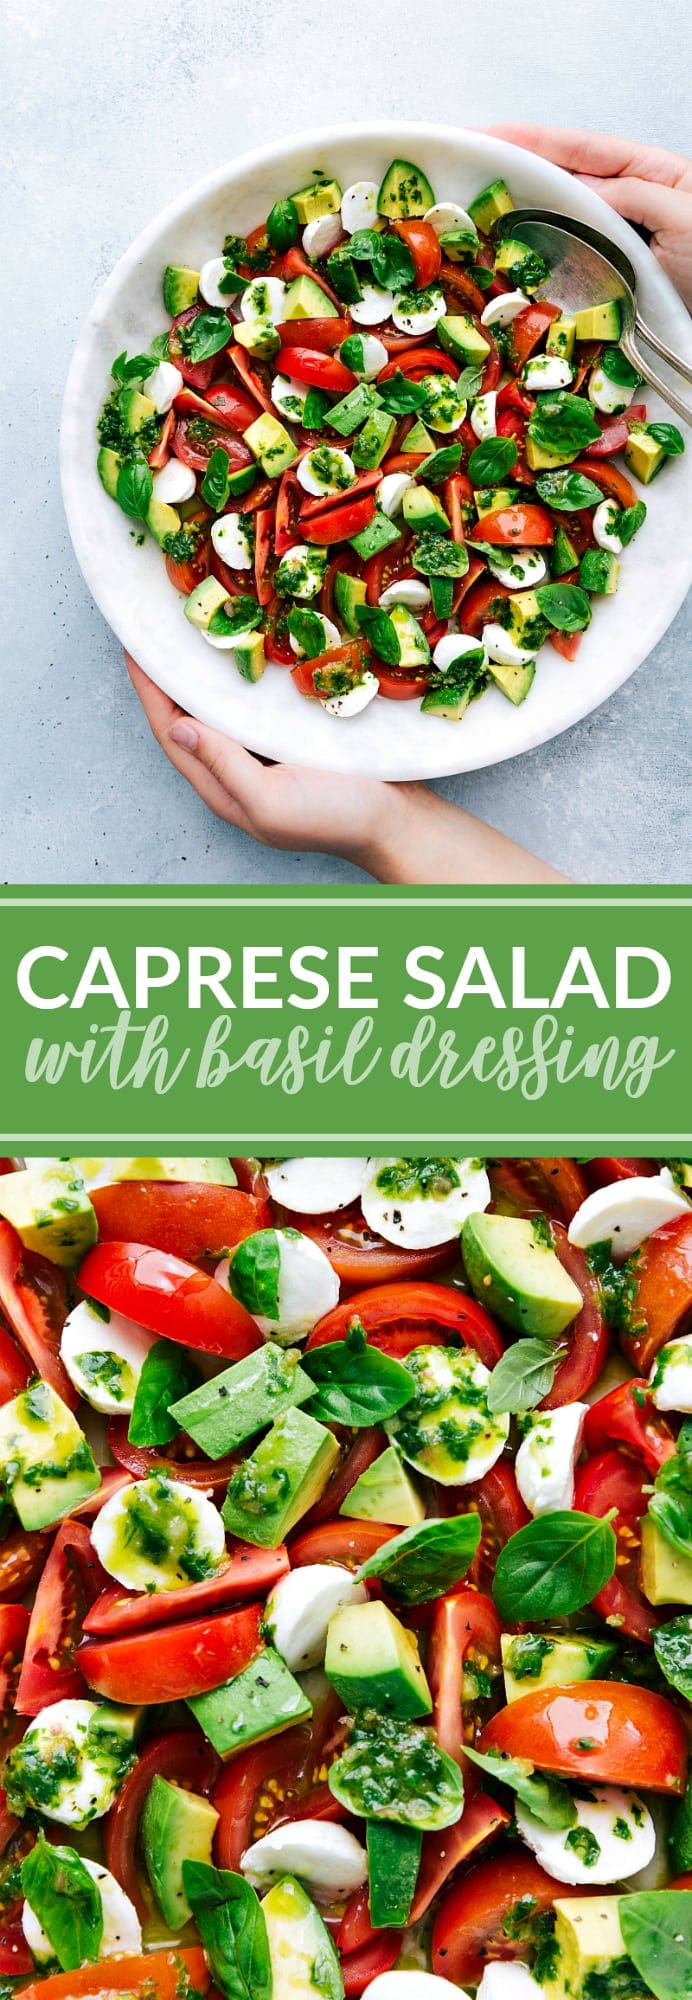 A delicious take on the famous Italian Caprese Salad with a simple basil dressing! via chelseasmessyapron.com